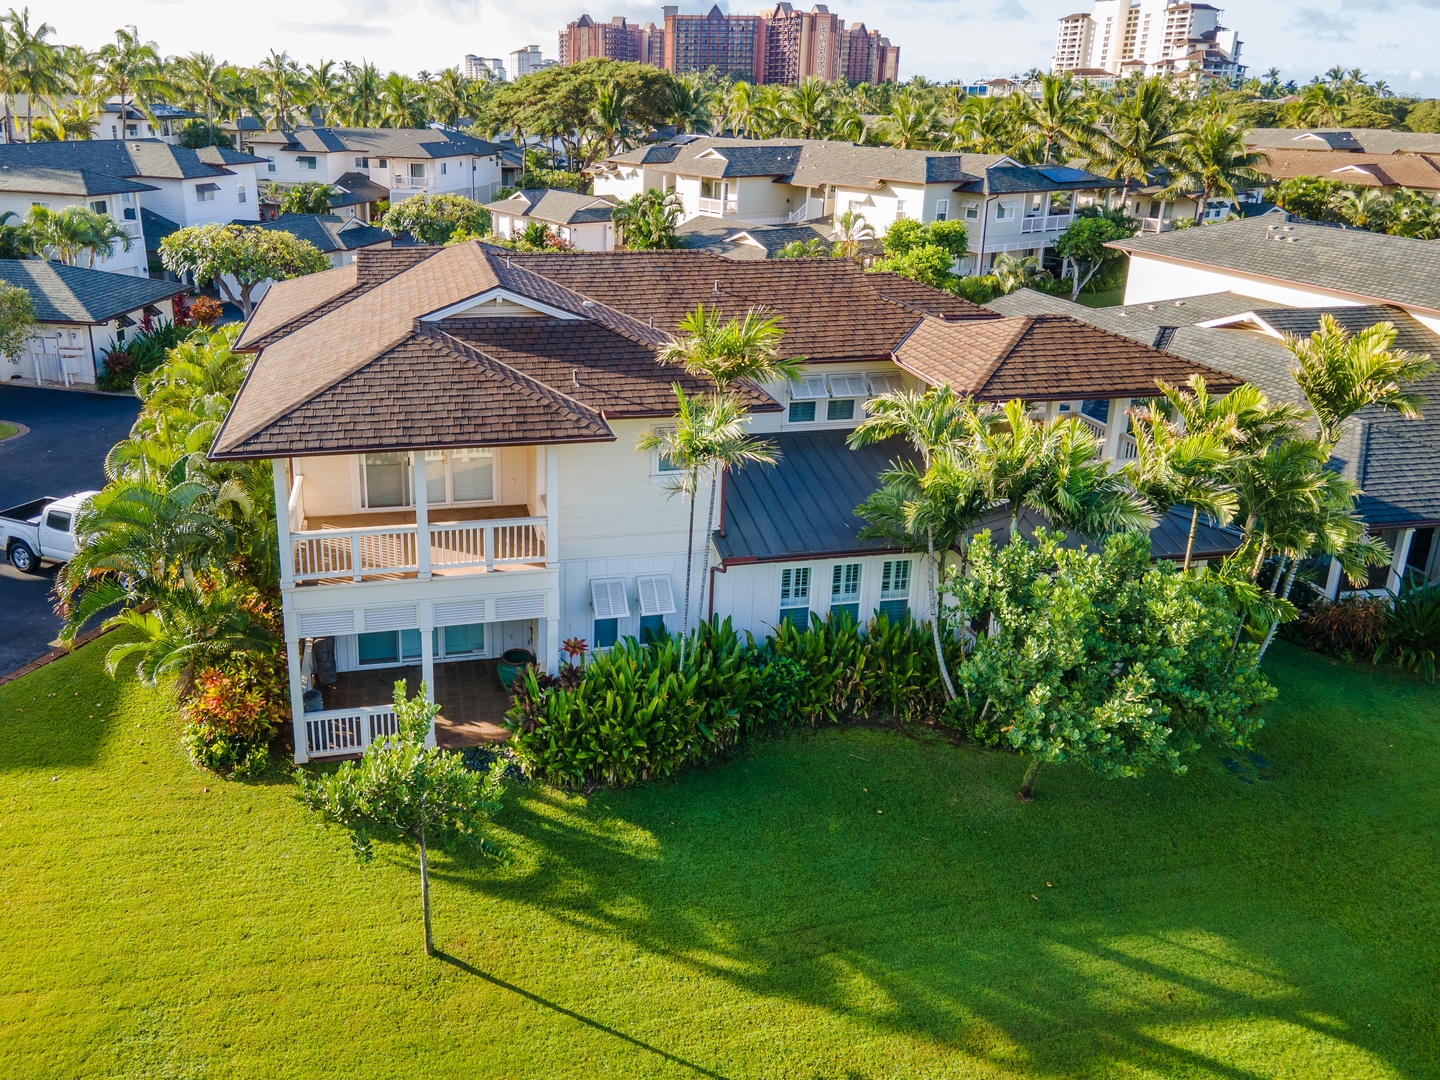 Kapolei Vacation Rentals, Coconut Plantation 1100-2 - An aerial view of the condo.